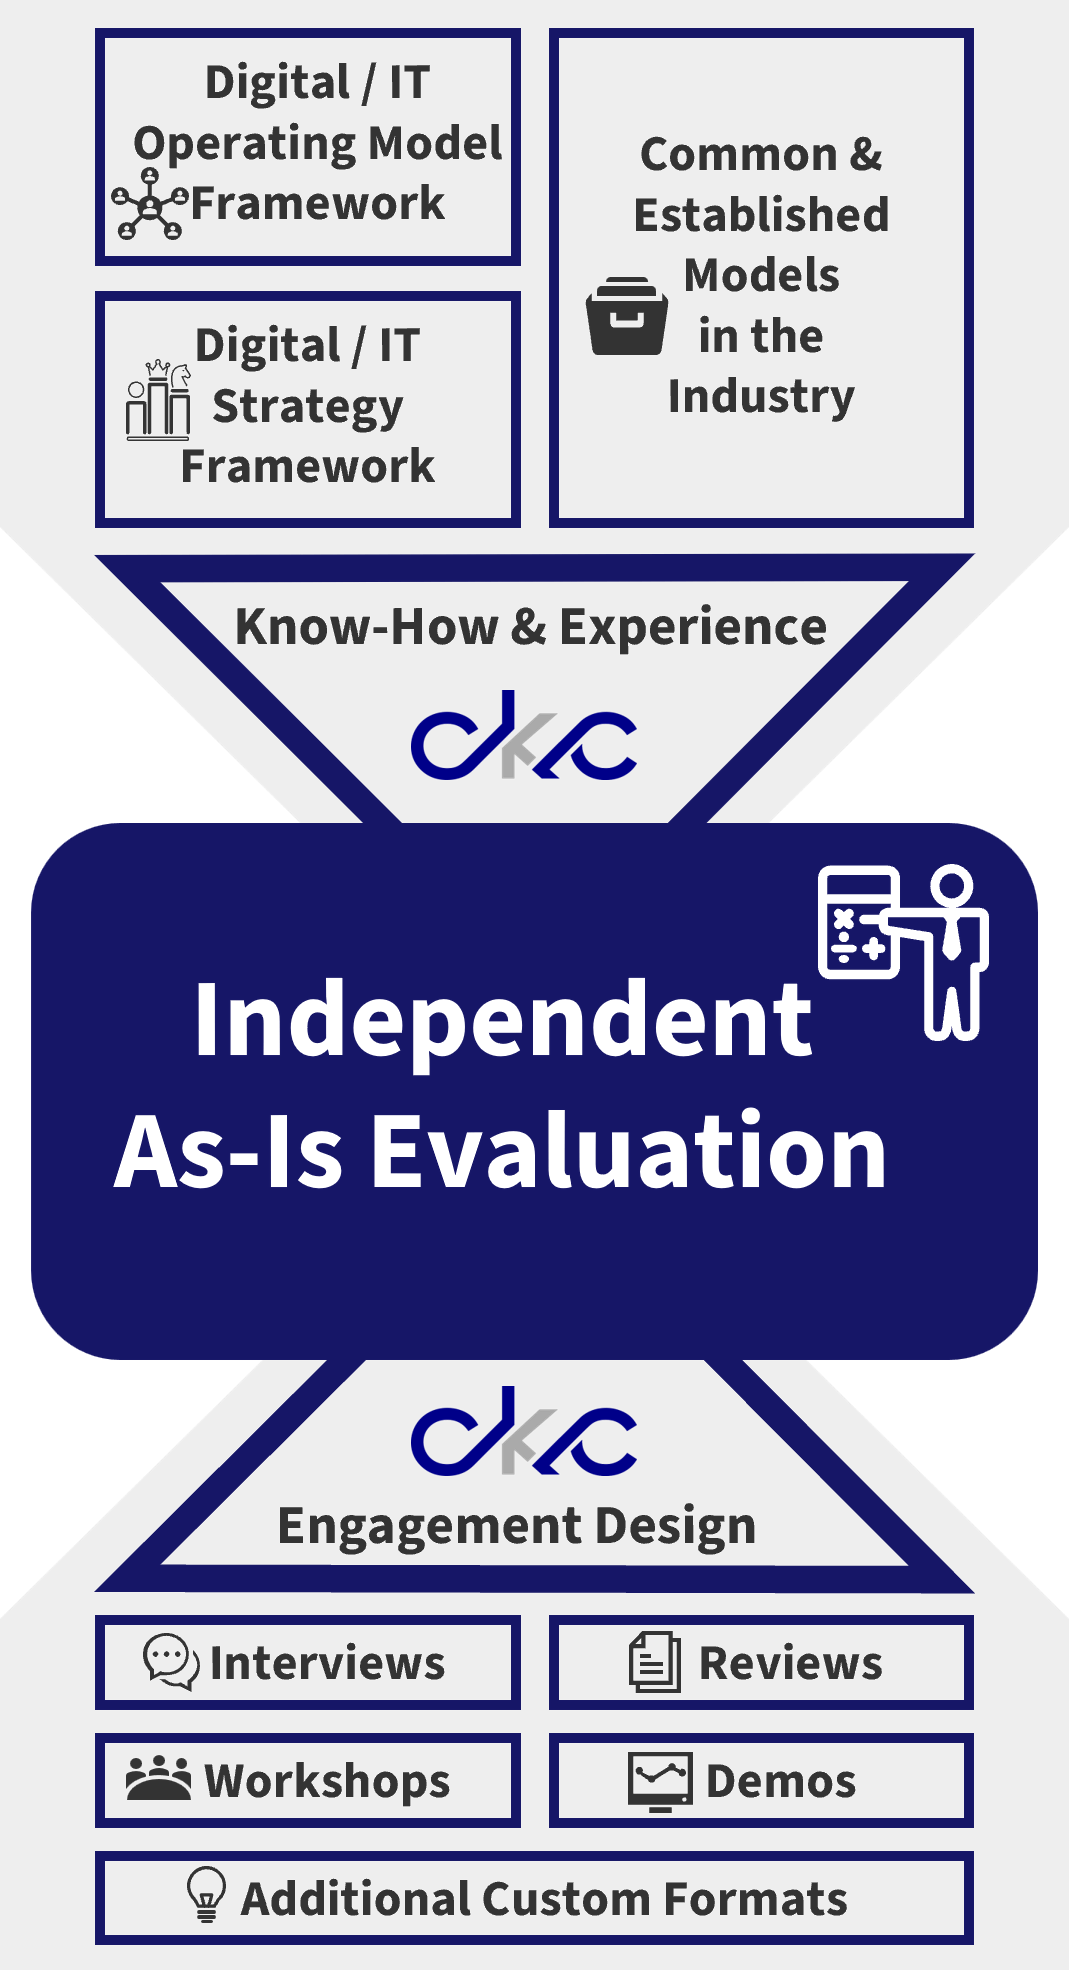 CKC Independent As-Is Evaluation - Phase 2